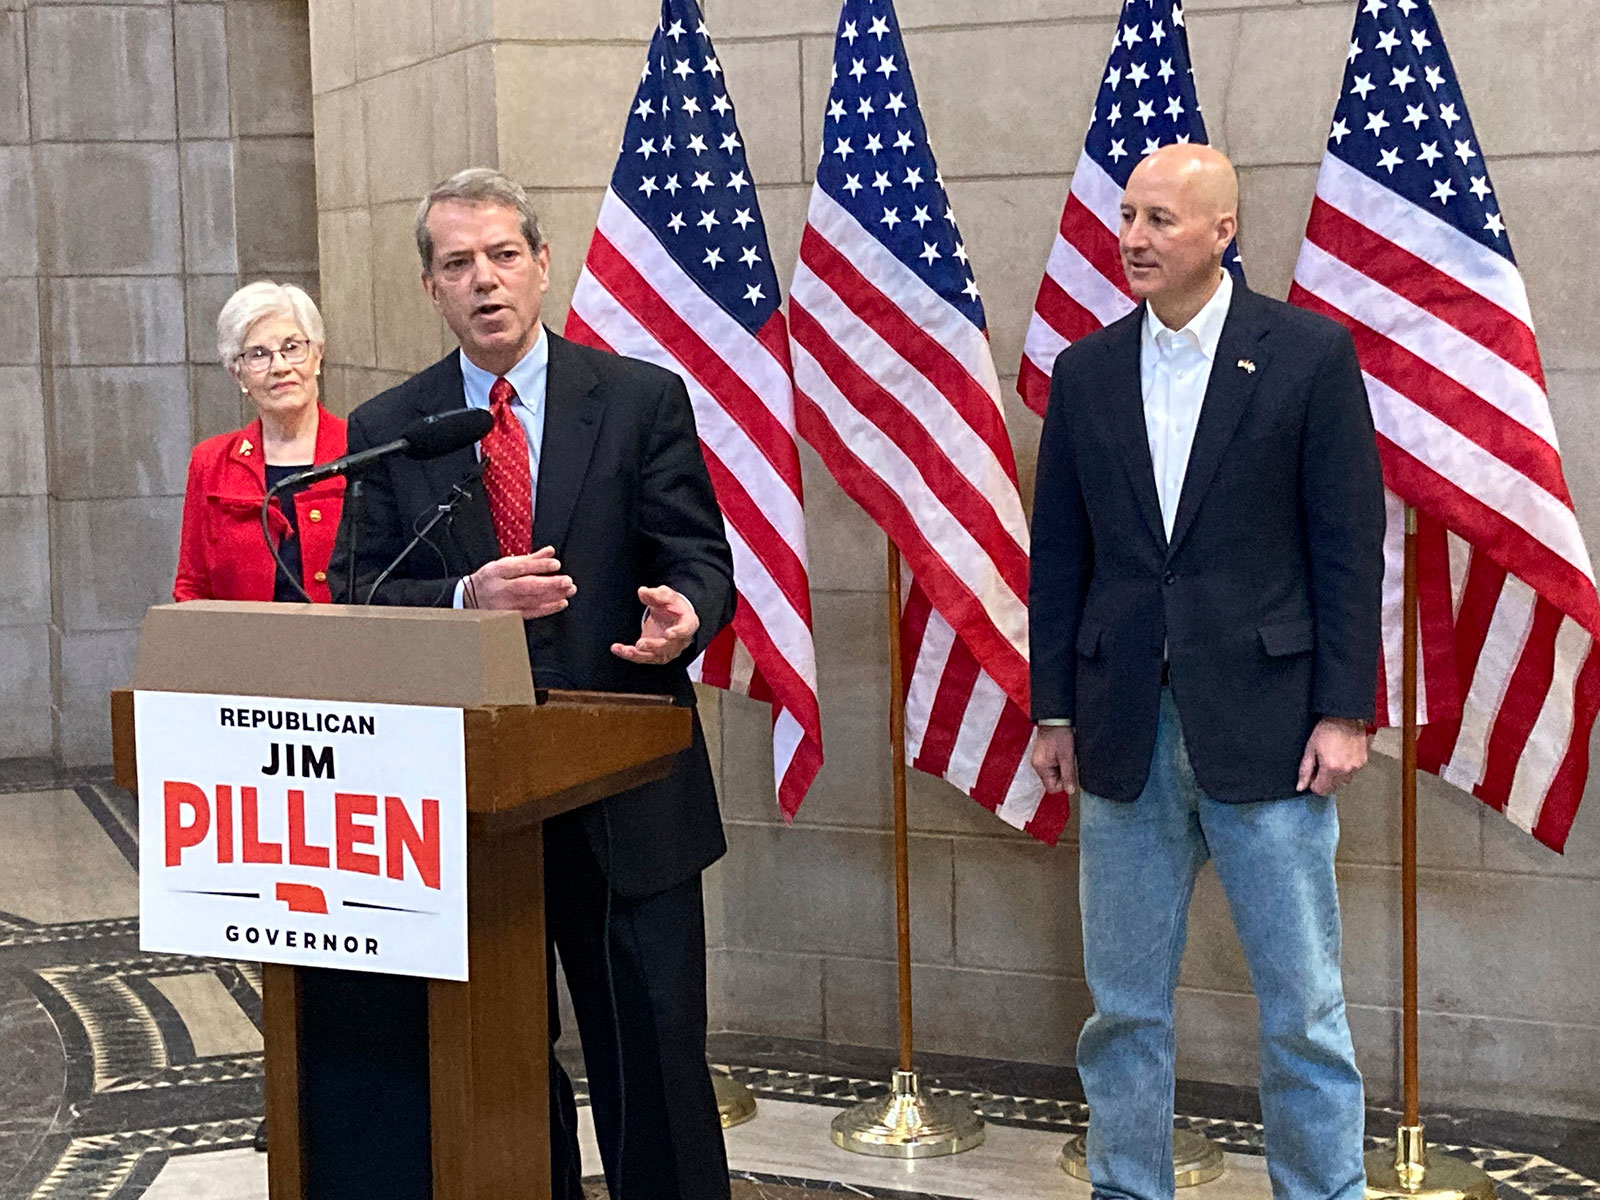 Jim Pillen, center, talks about his campaign after receiving an endorsement from Gov. Pete Ricketts, right, on January 18 at the state Capitol in Lincoln, Nebraska. 